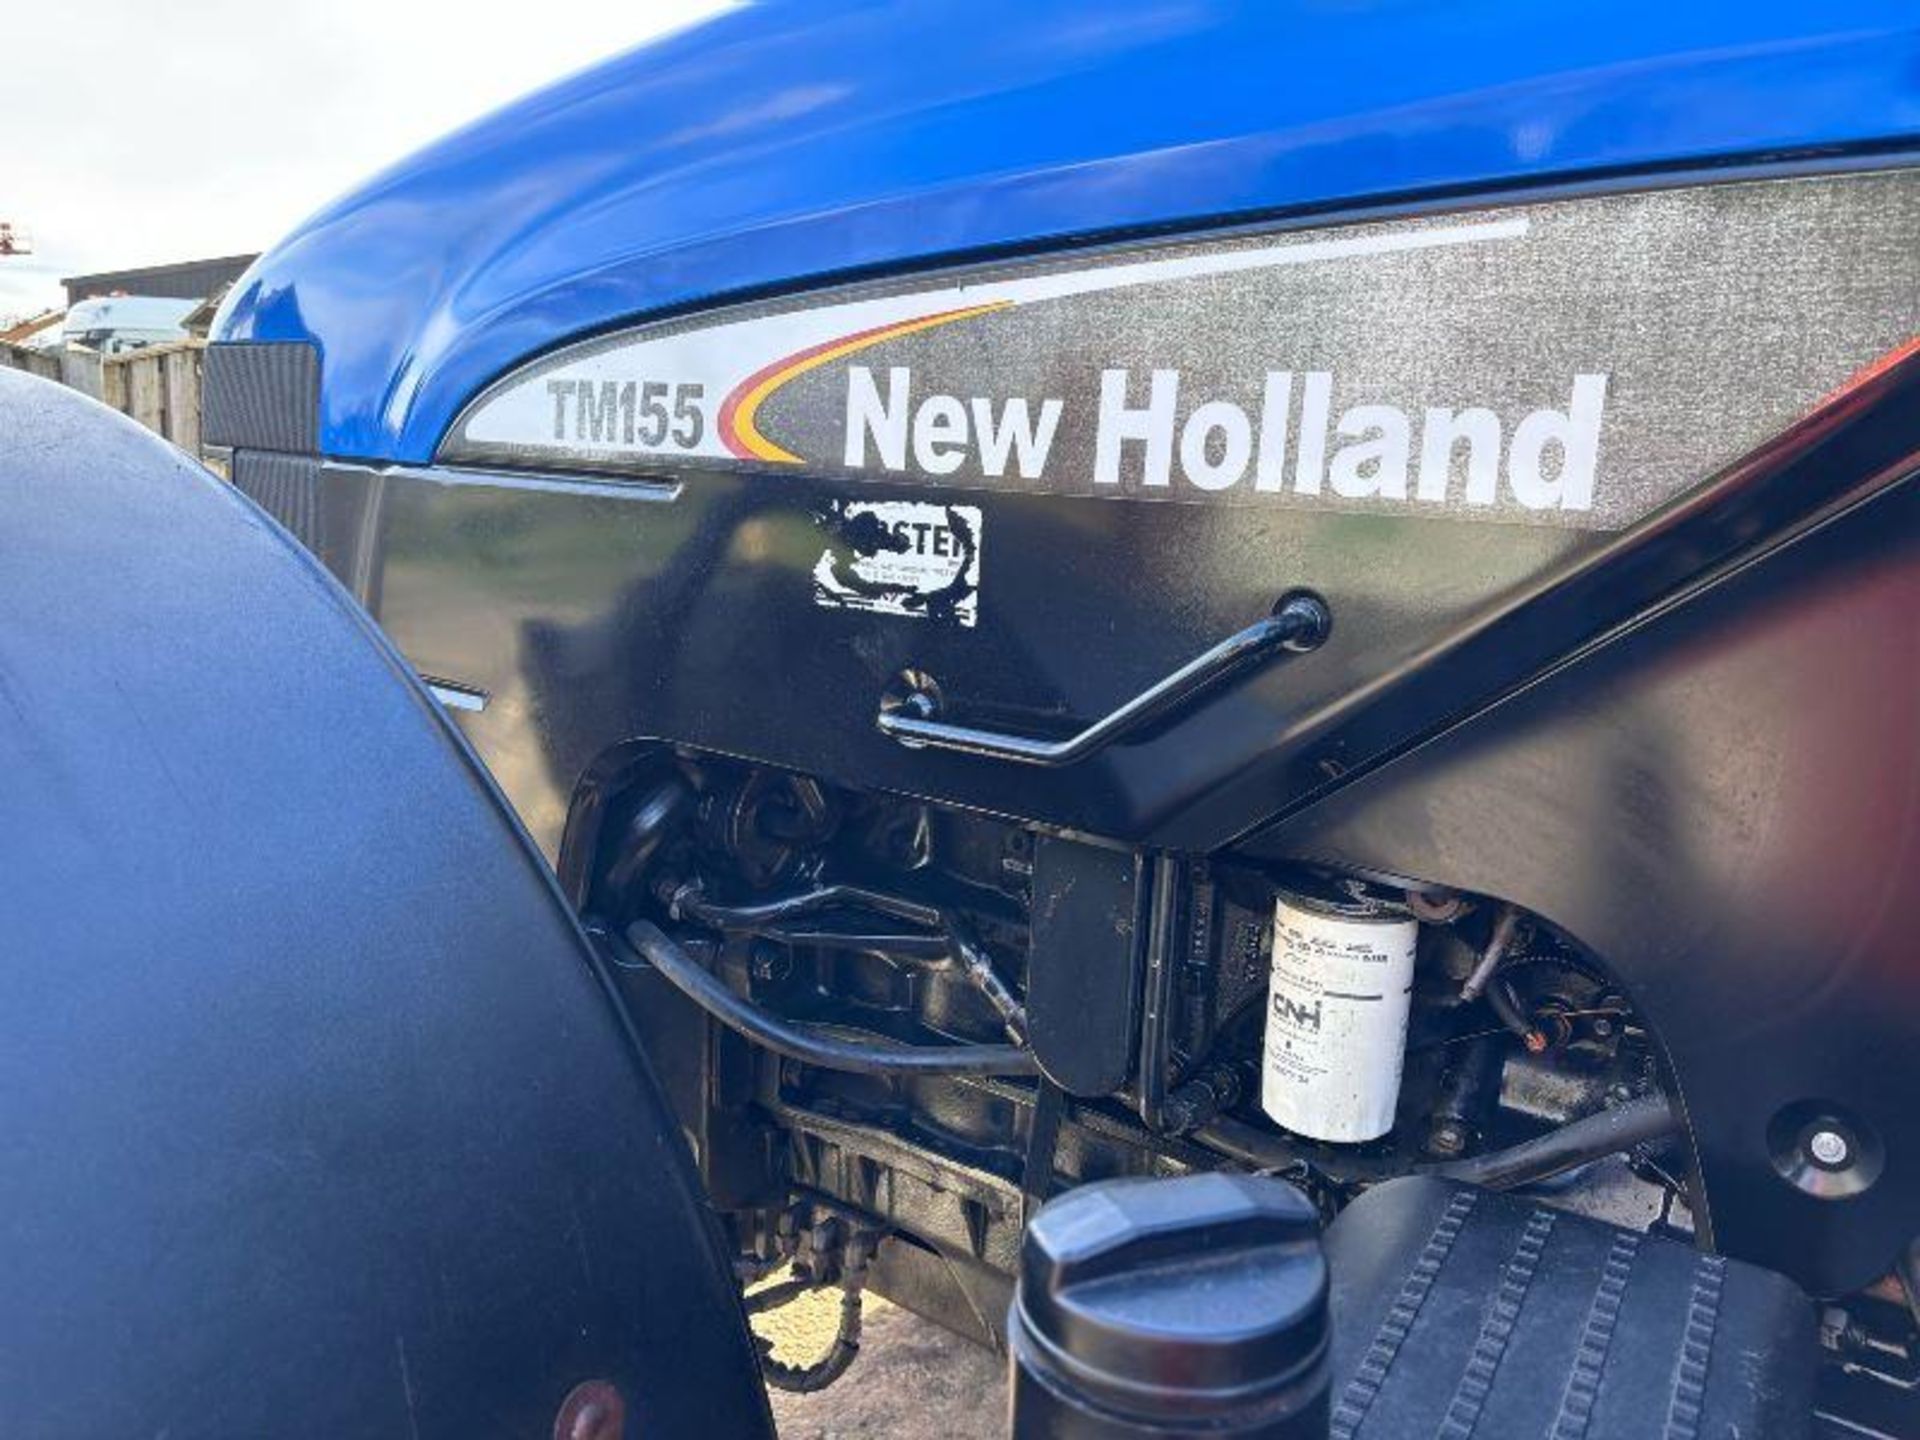 NEW HOLLAND TM155 4WD TRACTOR *5619 HOURS* C/W RANGE COMMAND GEAR BOX - Image 10 of 19